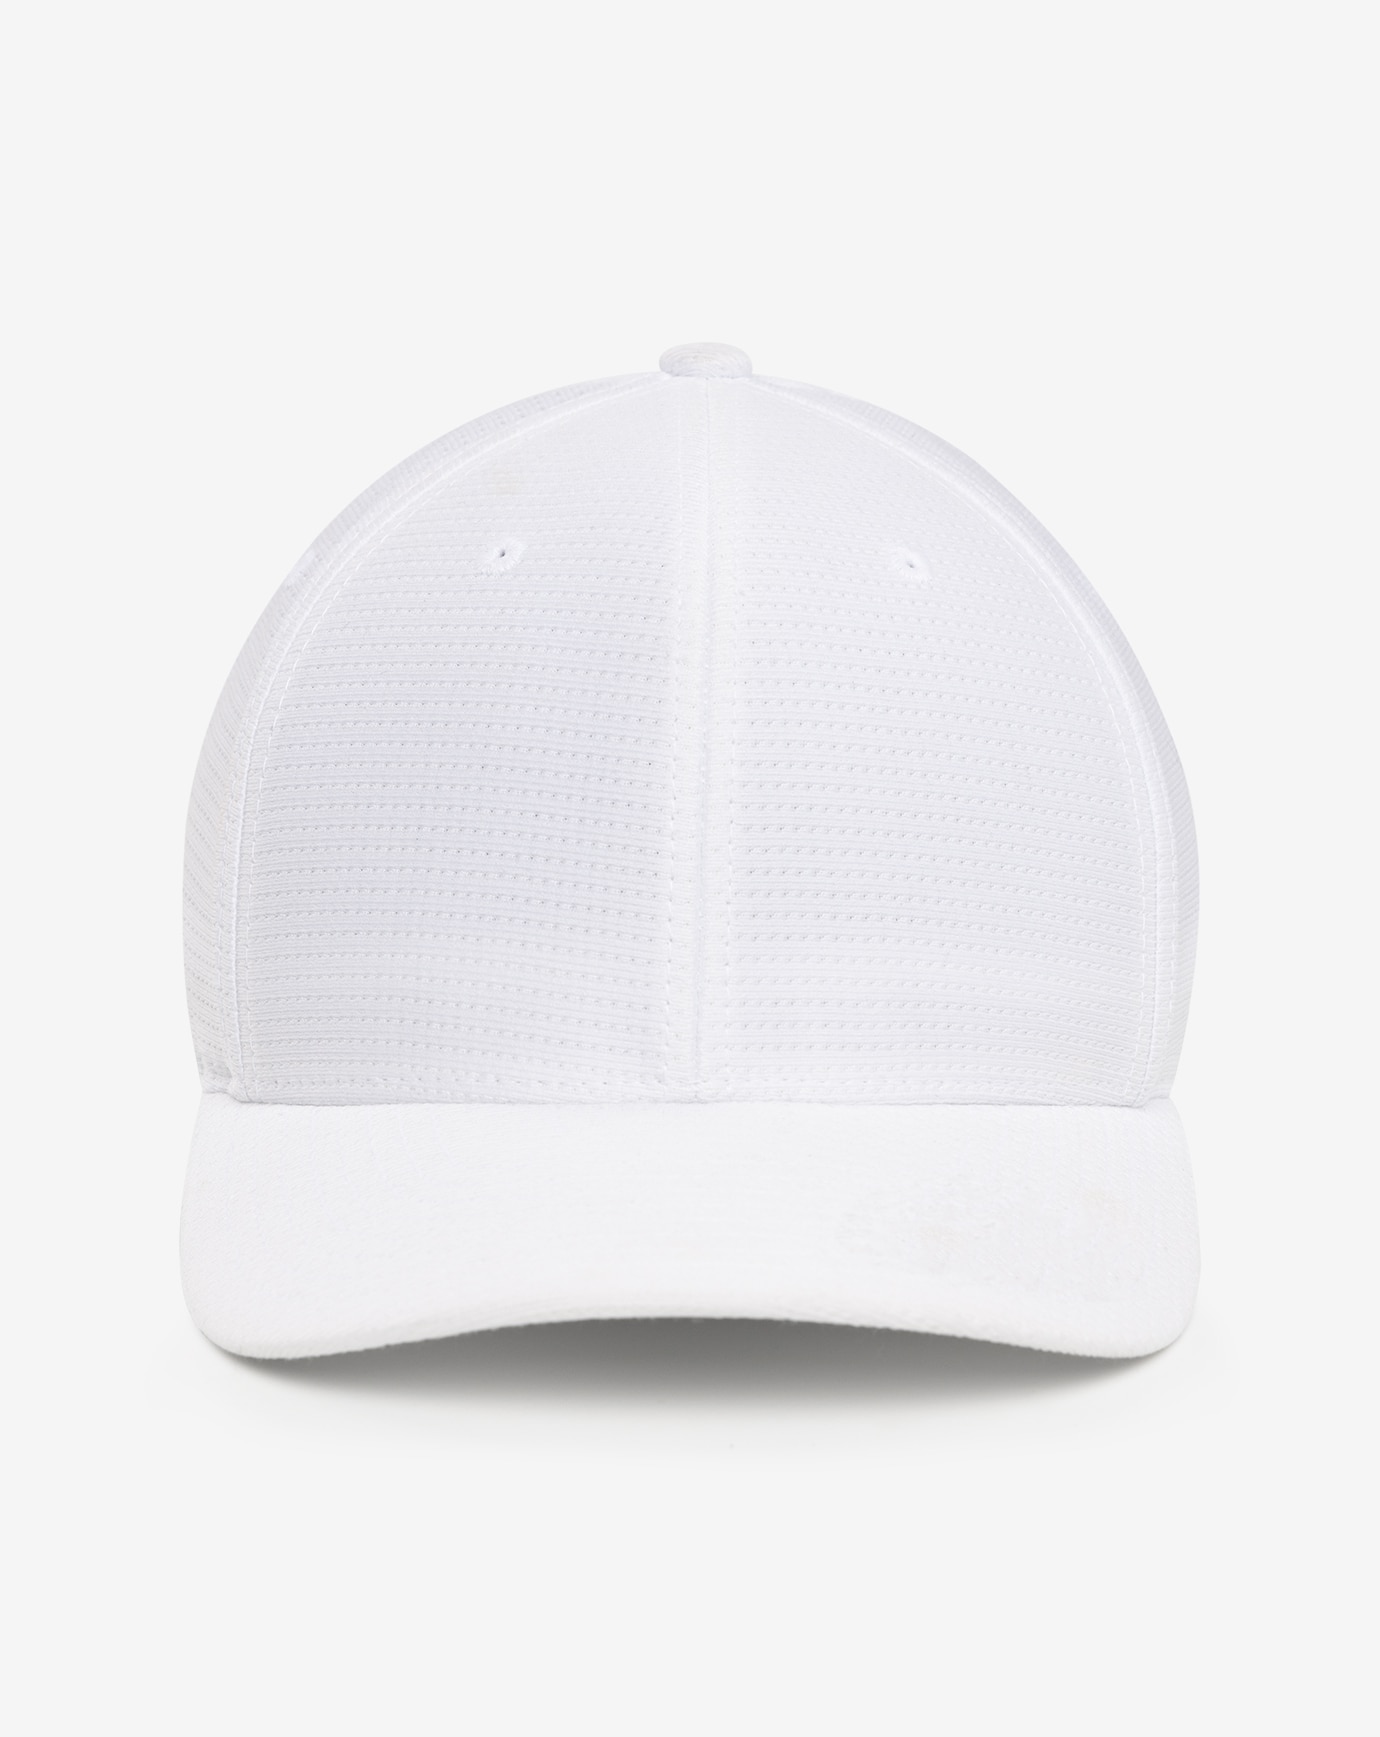 NASSAU FITTED HAT Image Thumbnail 1